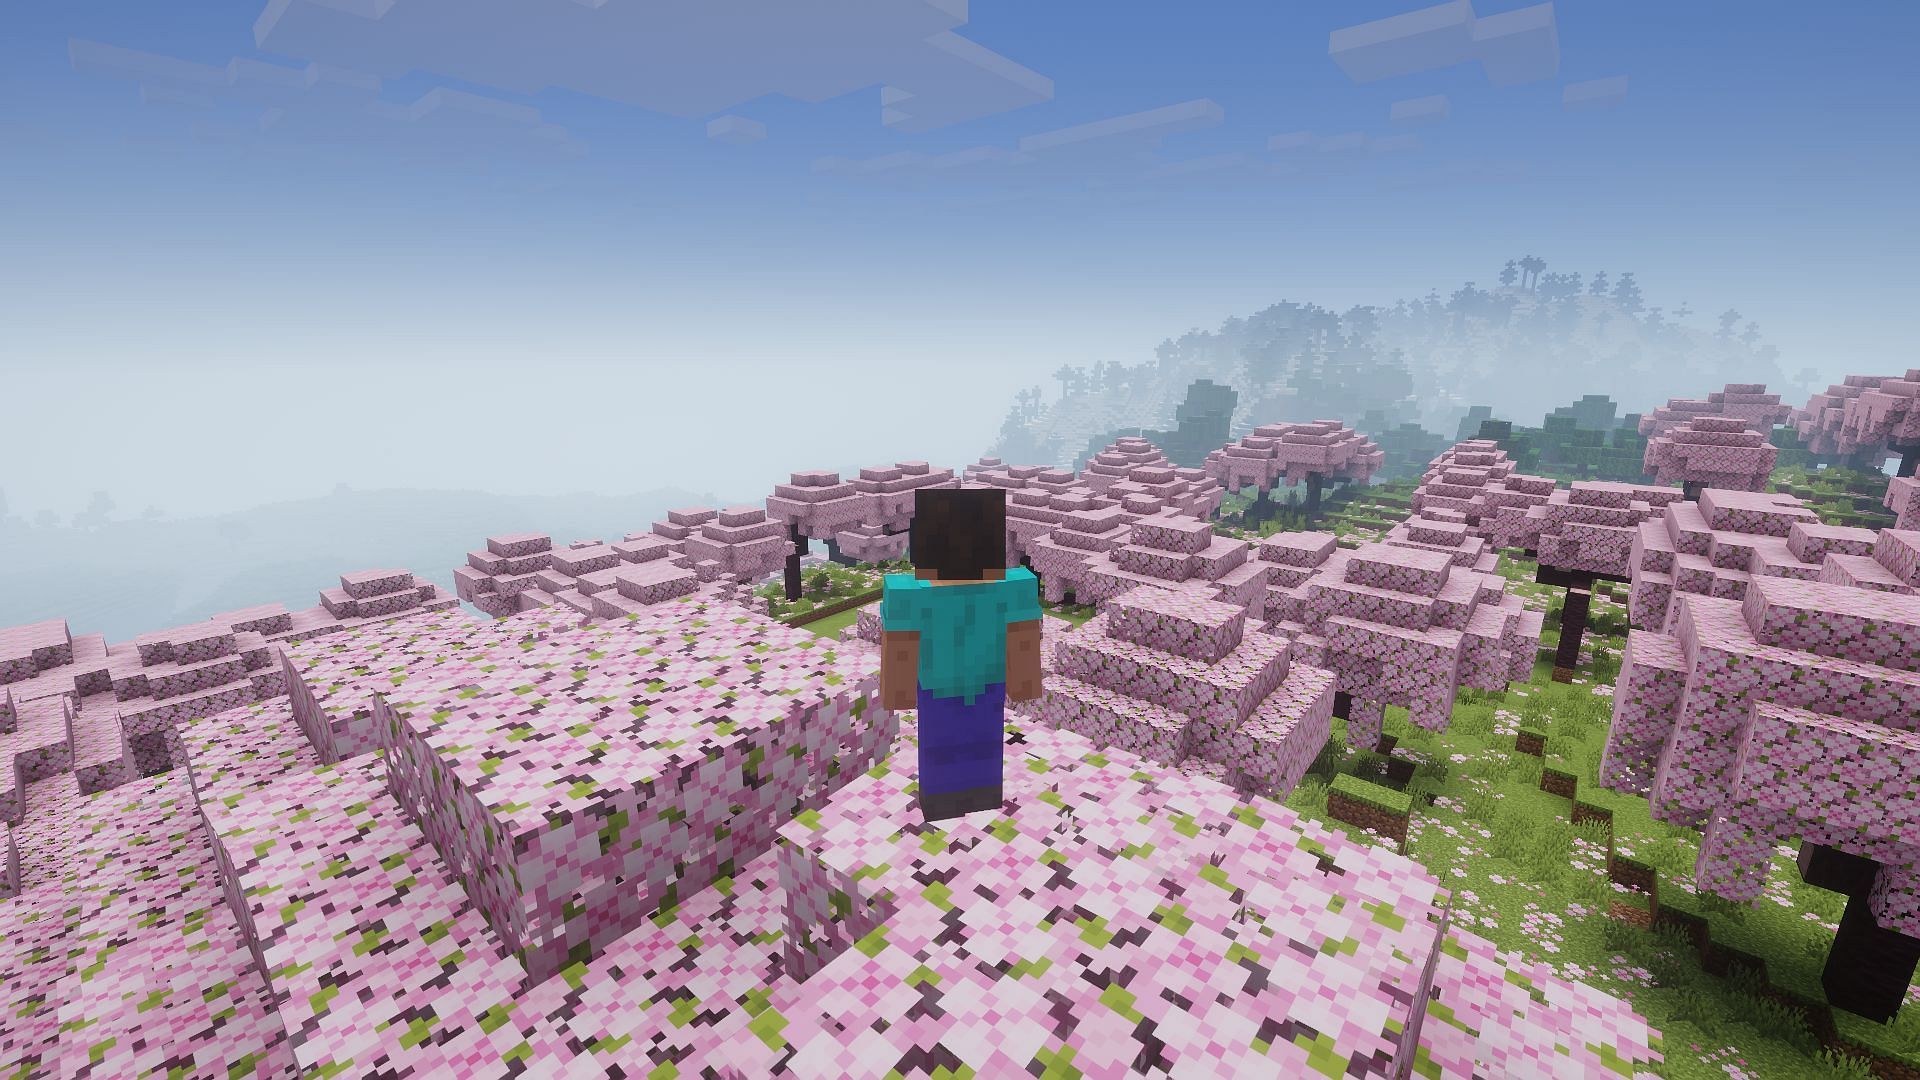 Cherry groves biome in Minecraft 1.20 with potato shaders (Image via Minecraft)